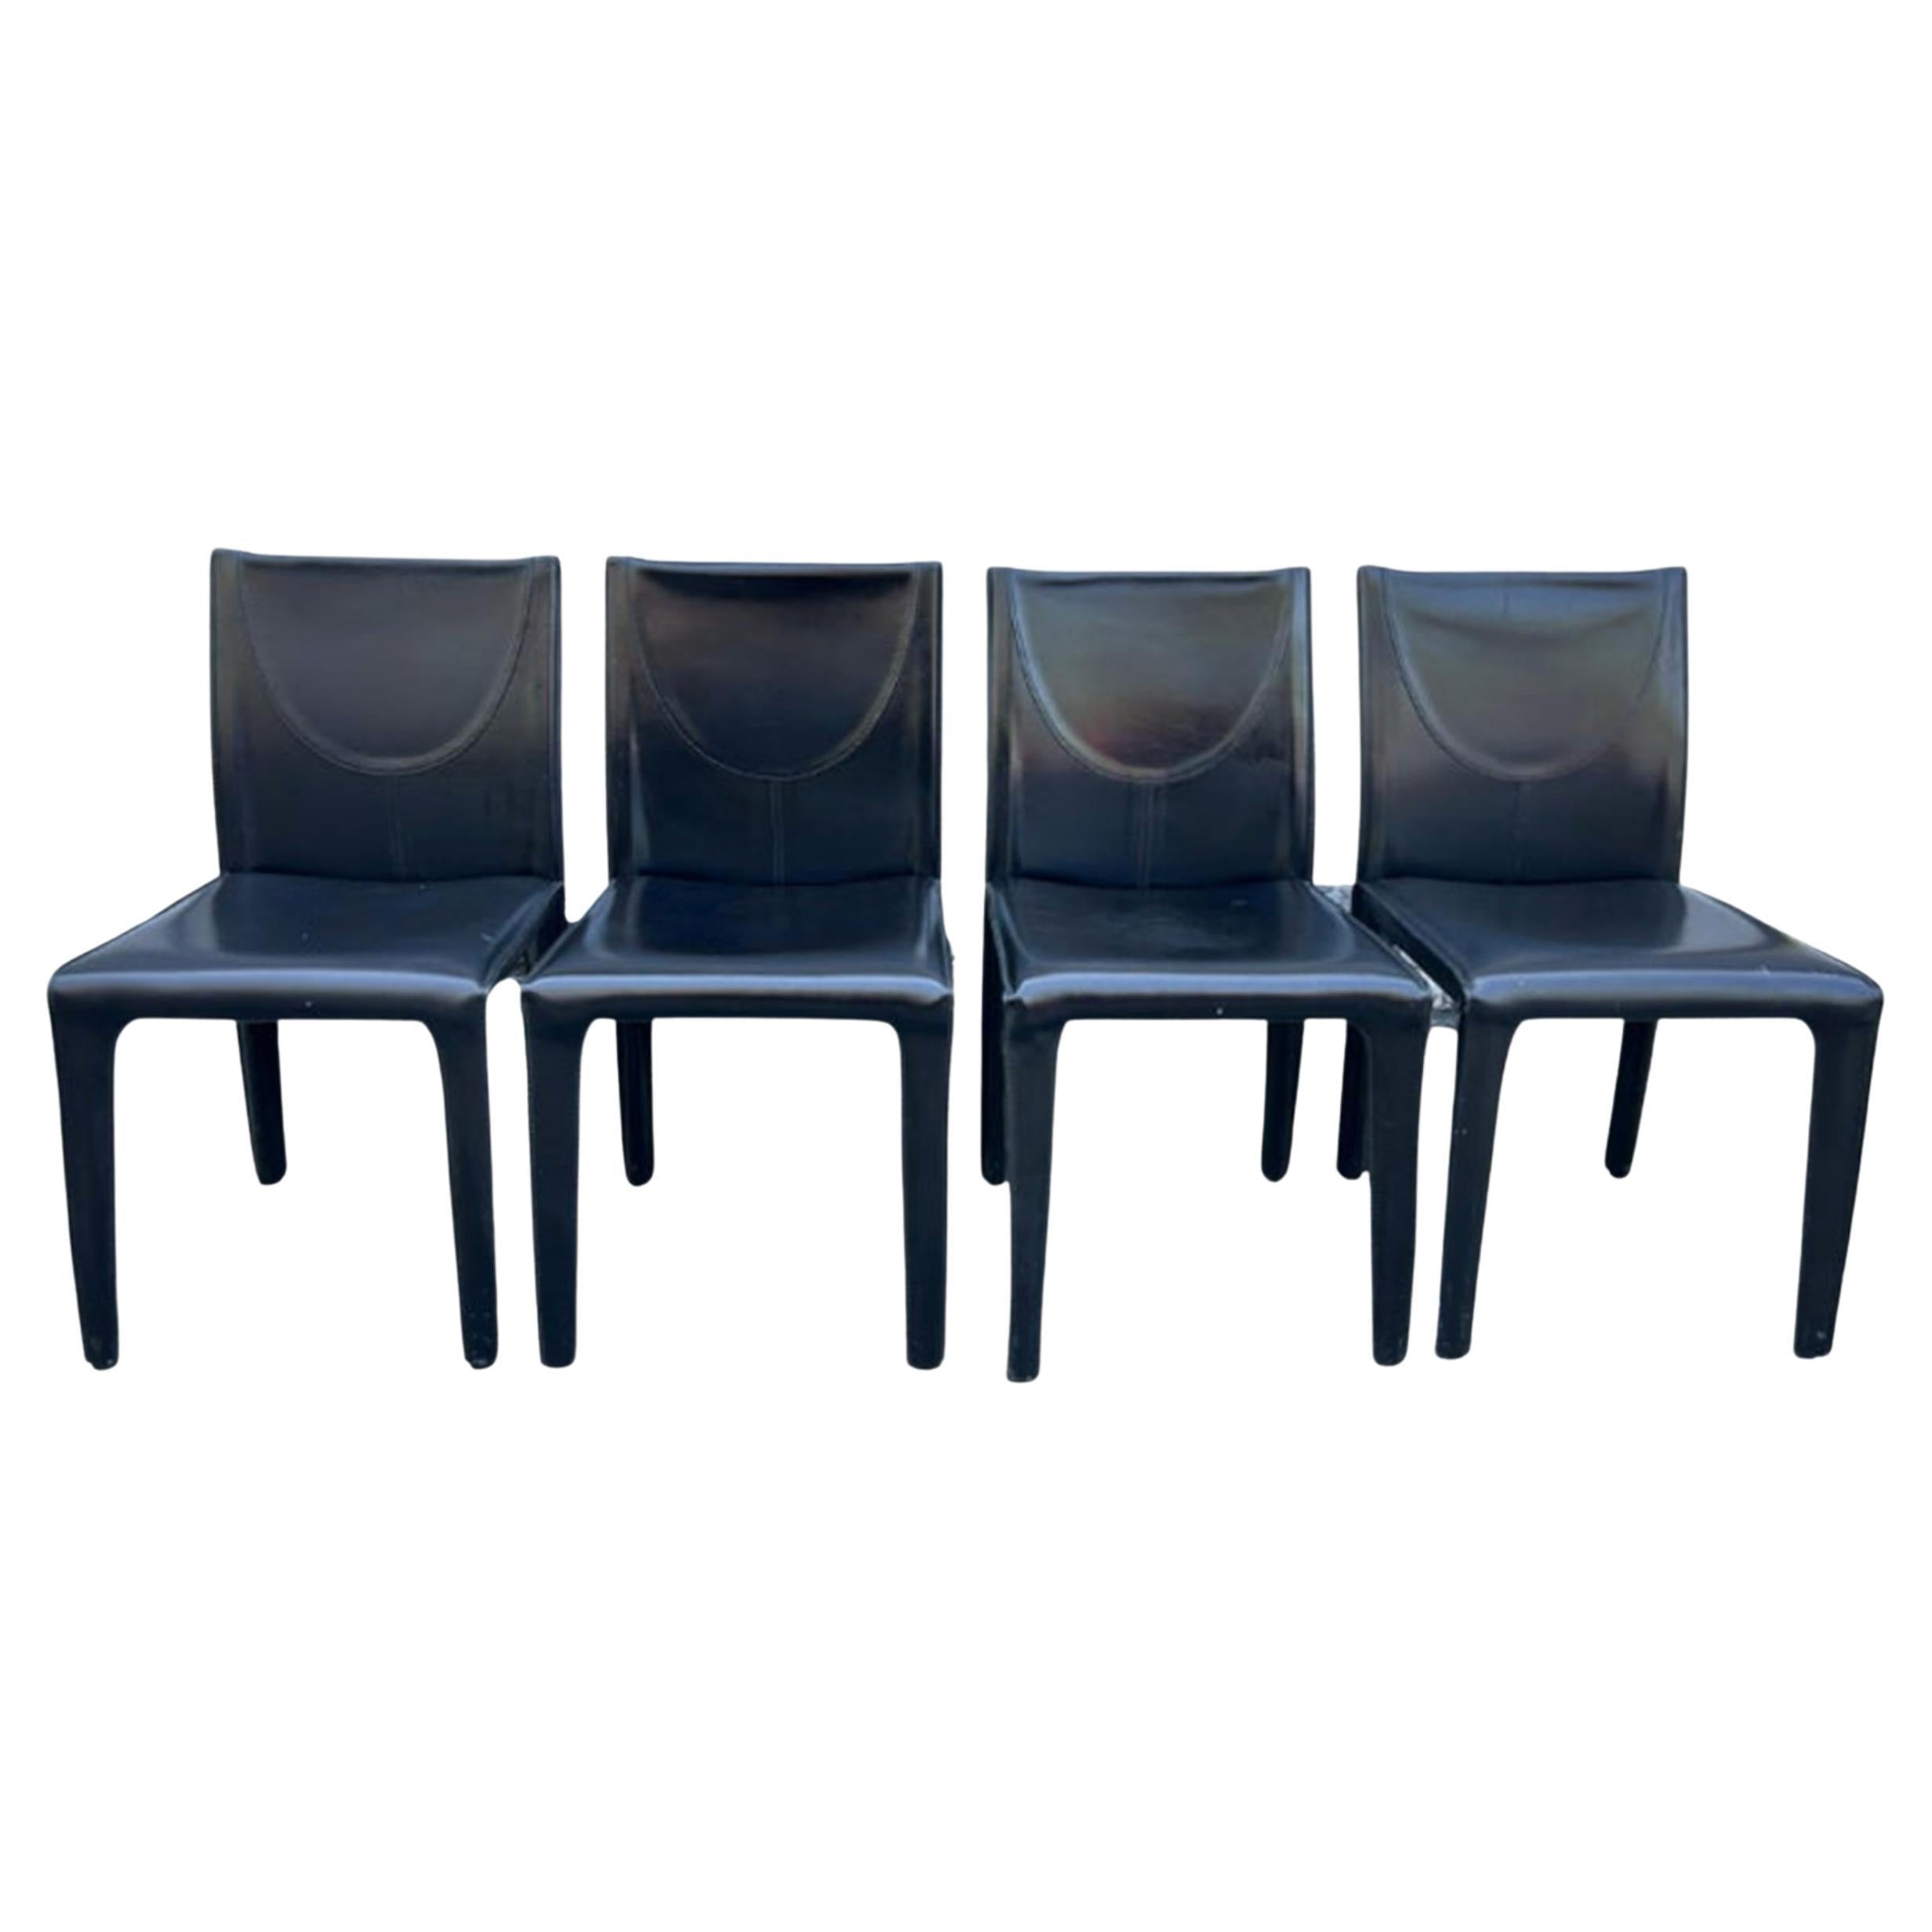 Set of 4 Black Leather Covered Dining Chairs by Arper Made in Italy For Sale